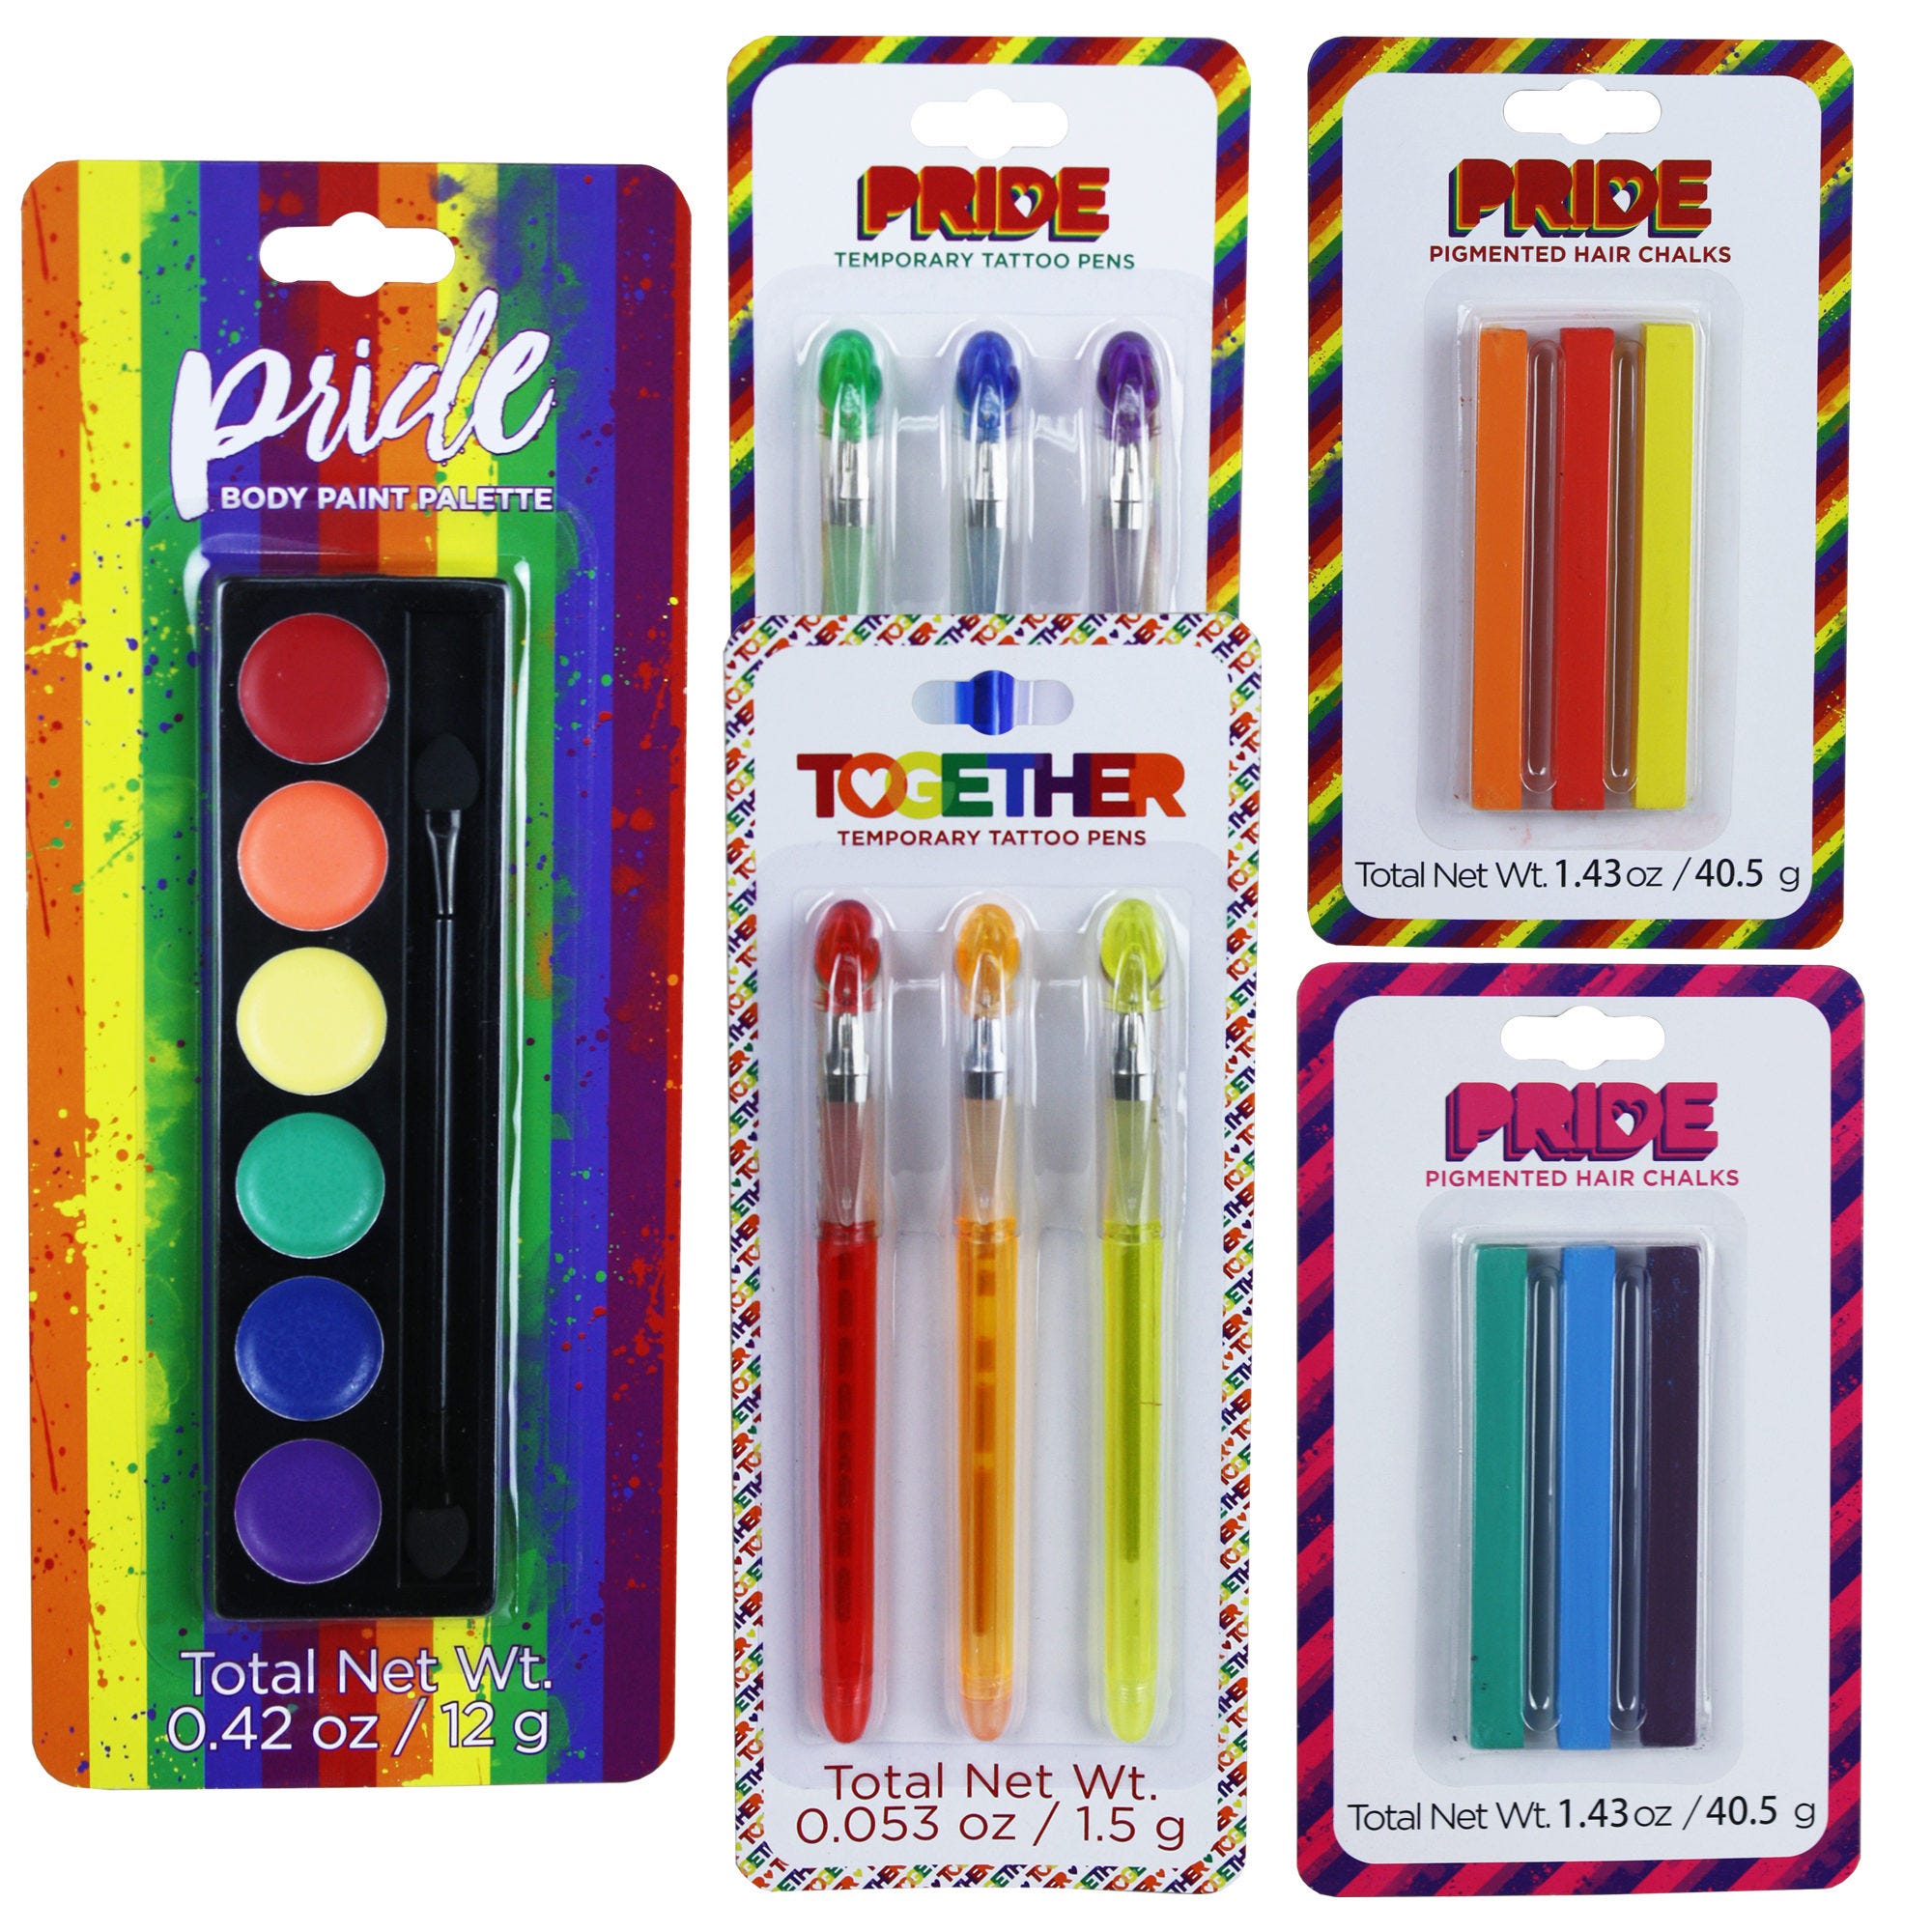 ''Pride Assortment Body Paint Palette, Hair Chalk, and TATTOO Pens - Qty 54''